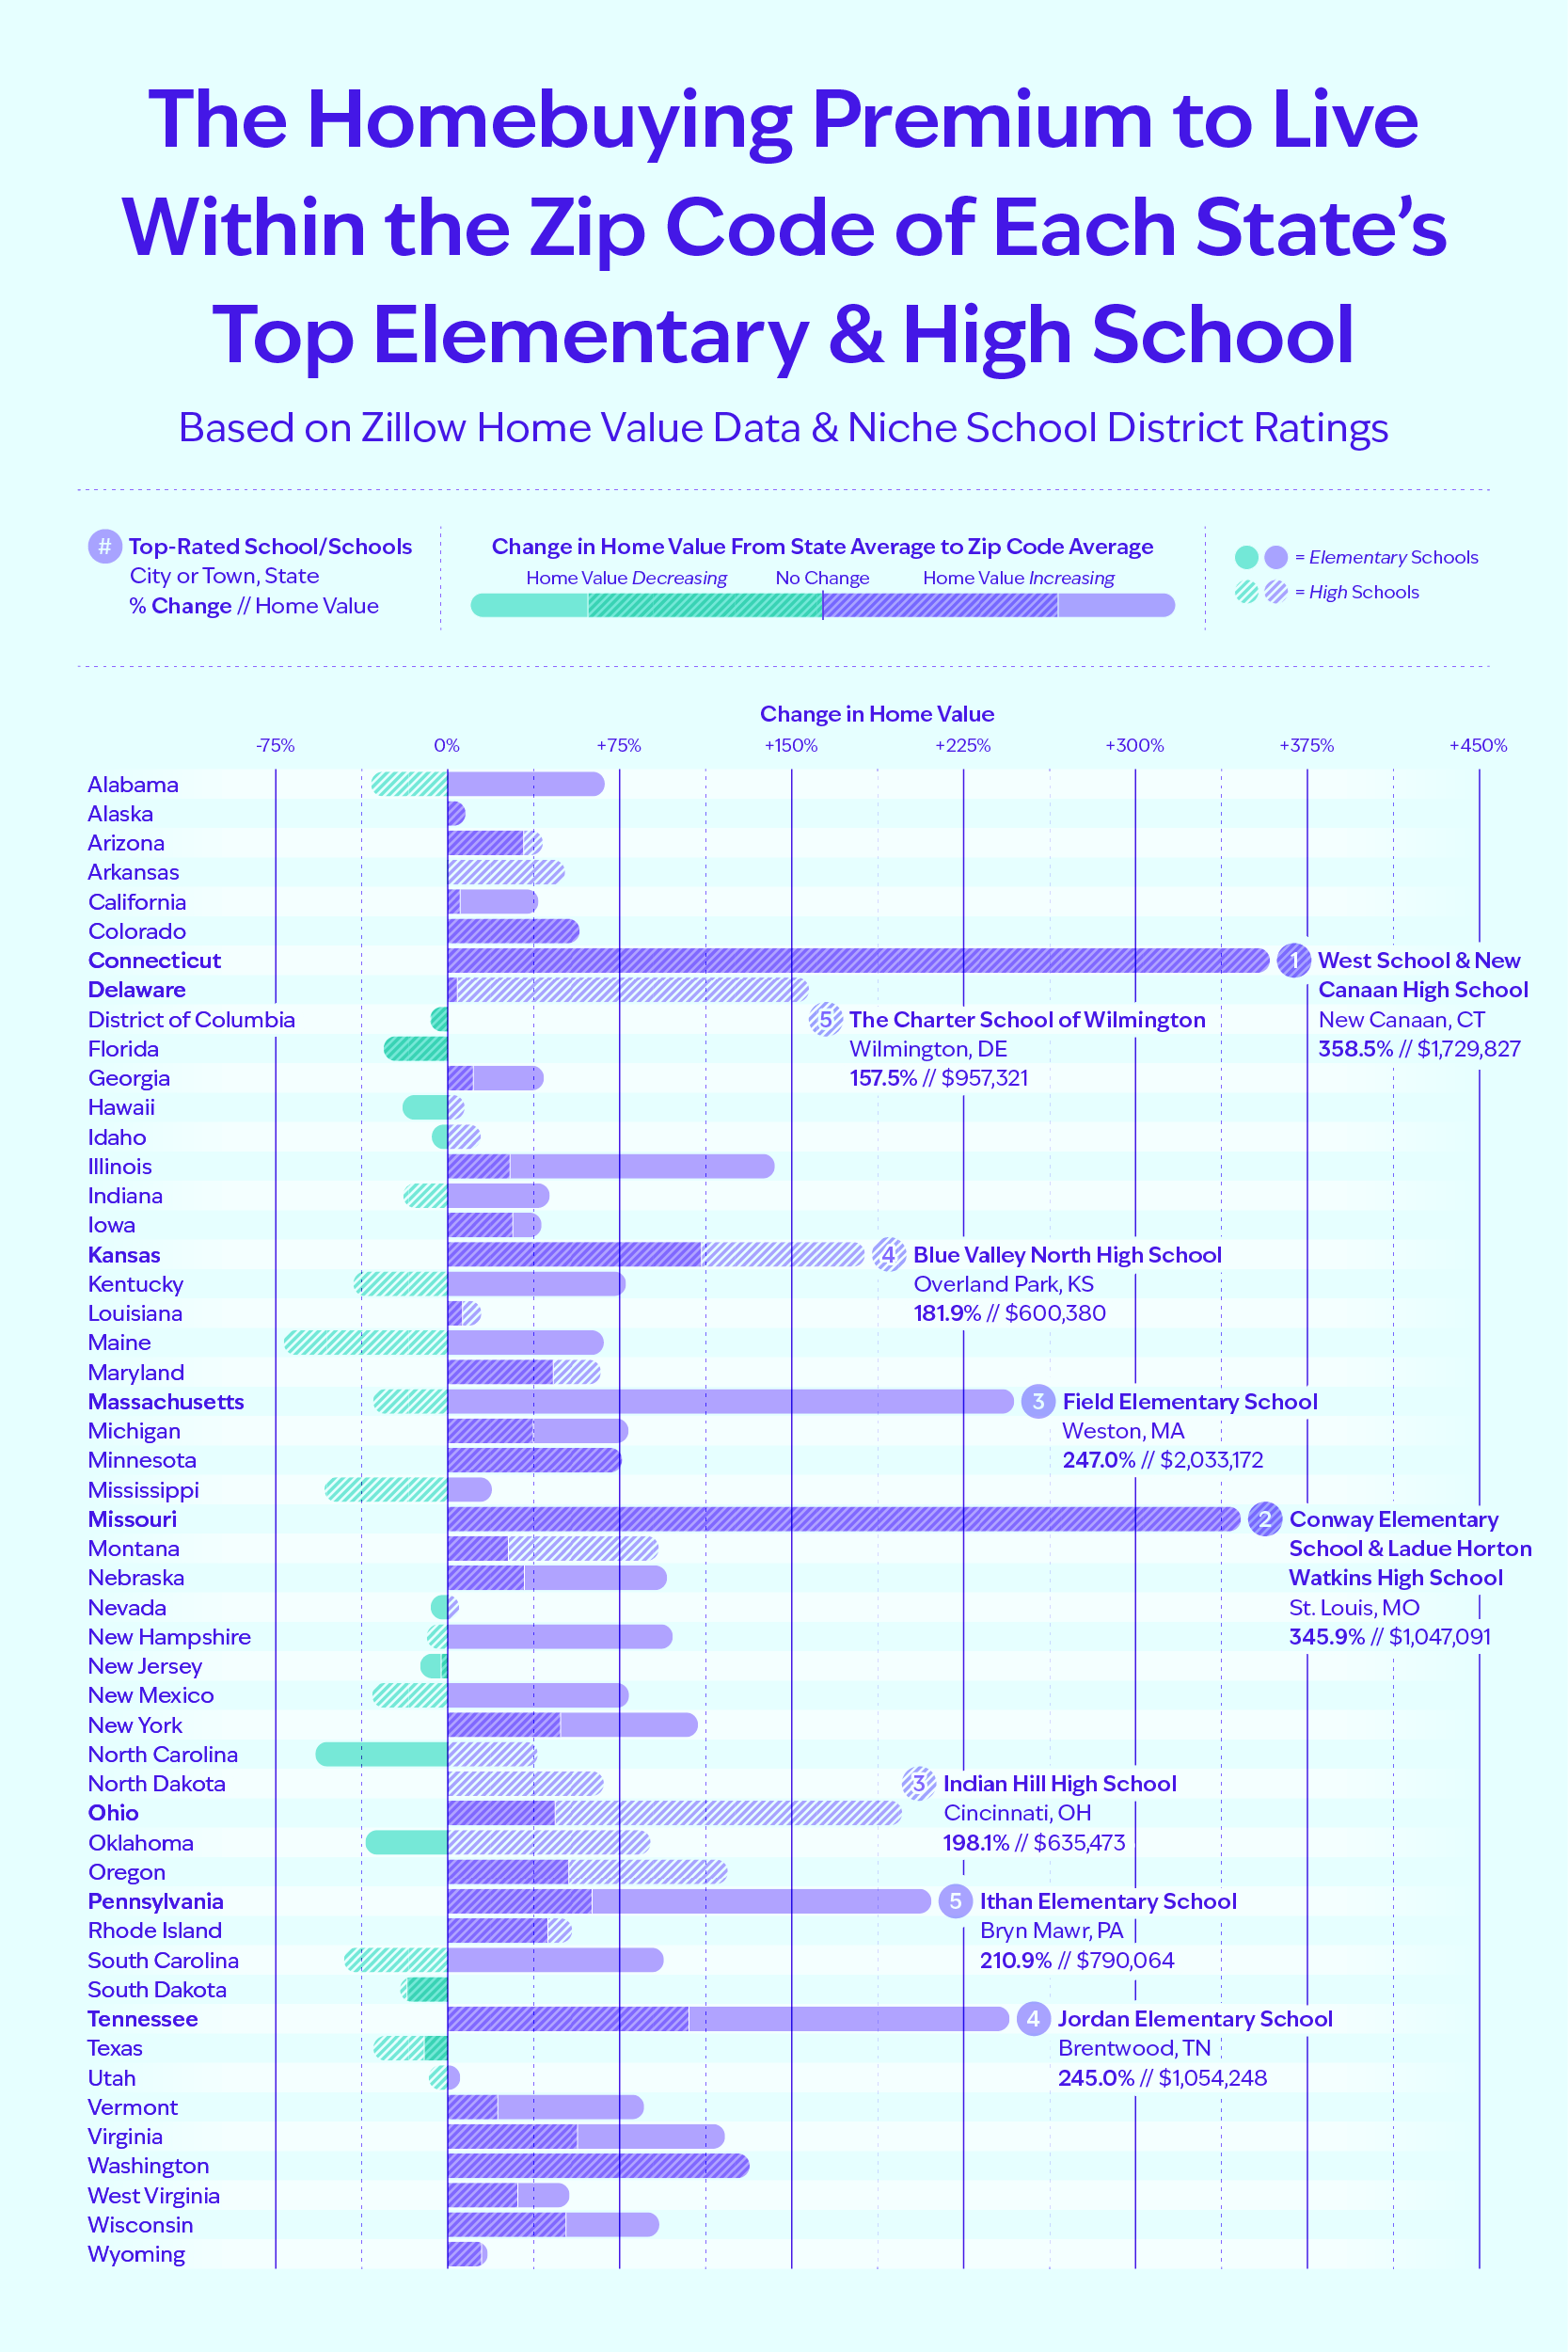 A bar chart showing the difference in home values between the state’s average and the average within the zip code of the top-rated schools
